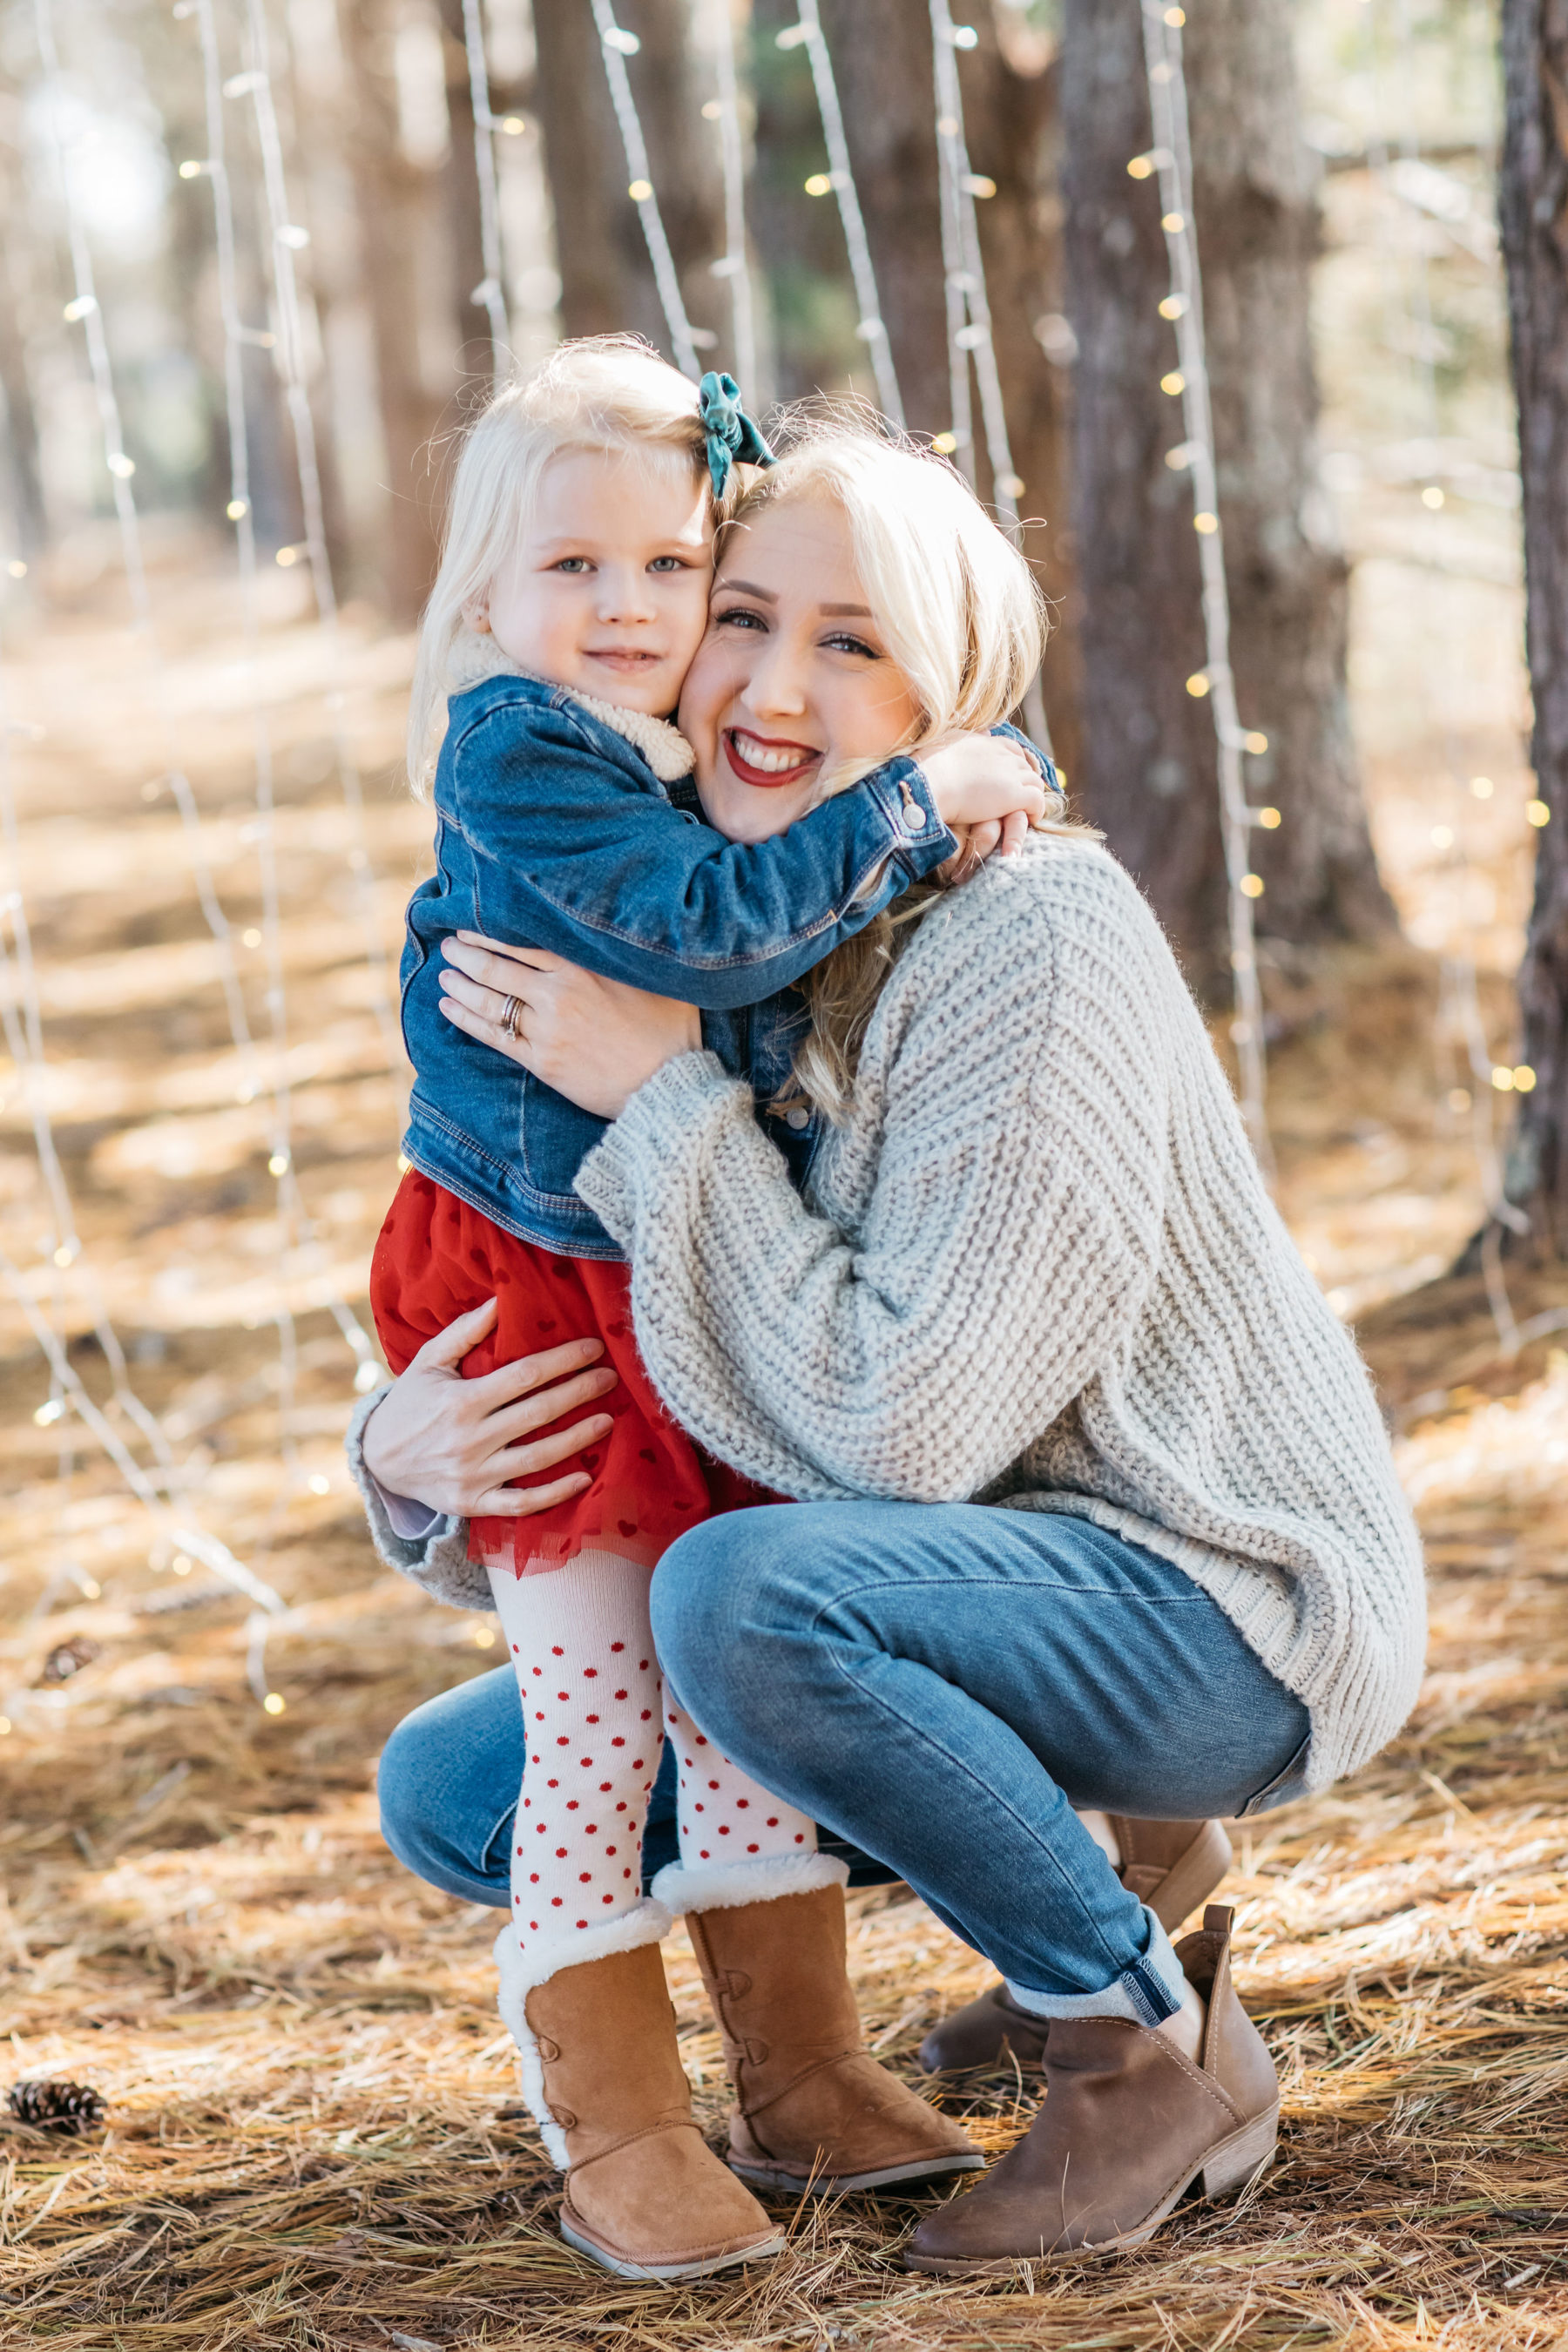 Family Outdoor Christmas Session captured by Meredith Teasley Photography